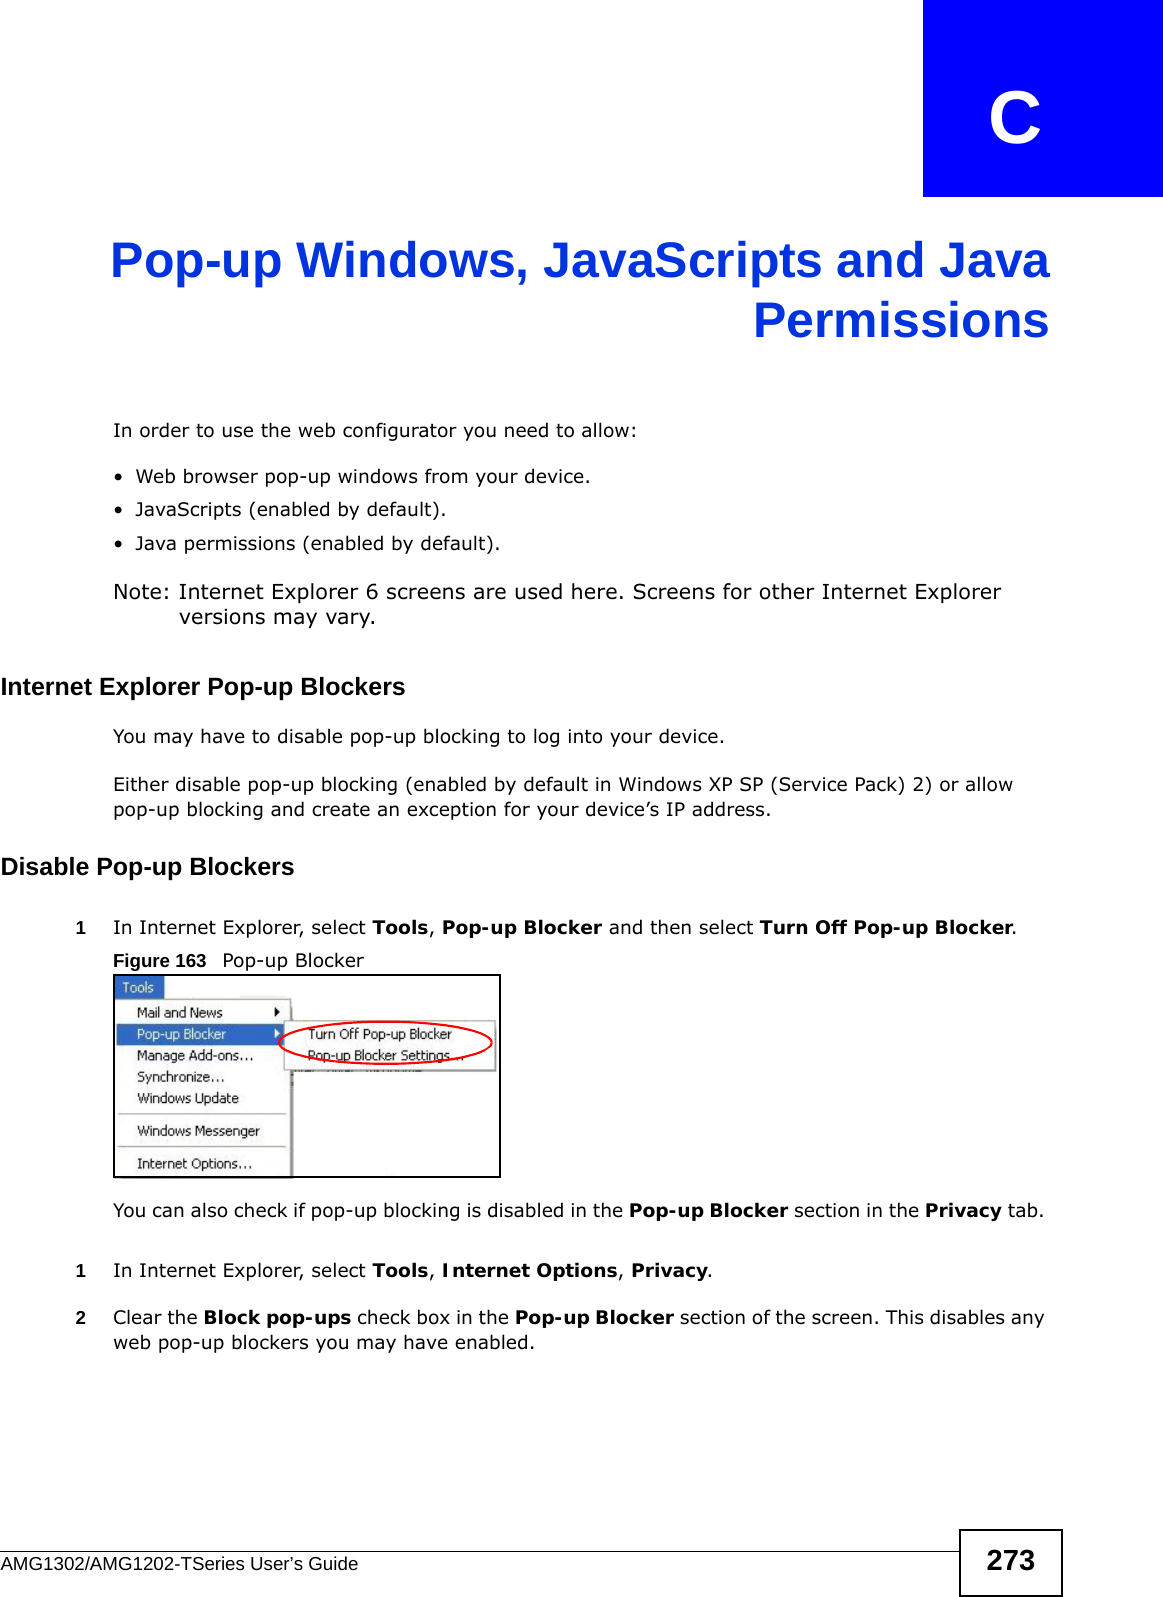 AMG1302/AMG1202-TSeries User’s Guide 273APPENDIX   CPop-up Windows, JavaScripts and JavaPermissionsIn order to use the web configurator you need to allow:• Web browser pop-up windows from your device.• JavaScripts (enabled by default).• Java permissions (enabled by default).Note: Internet Explorer 6 screens are used here. Screens for other Internet Explorer versions may vary.Internet Explorer Pop-up BlockersYou may have to disable pop-up blocking to log into your device. Either disable pop-up blocking (enabled by default in Windows XP SP (Service Pack) 2) or allow pop-up blocking and create an exception for your device’s IP address.Disable Pop-up Blockers1In Internet Explorer, select Tools, Pop-up Blocker and then select Turn Off Pop-up Blocker. Figure 163   Pop-up BlockerYou can also check if pop-up blocking is disabled in the Pop-up Blocker section in the Privacy tab. 1In Internet Explorer, select Tools, Internet Options, Privacy.2Clear the Block pop-ups check box in the Pop-up Blocker section of the screen. This disables any web pop-up blockers you may have enabled. 